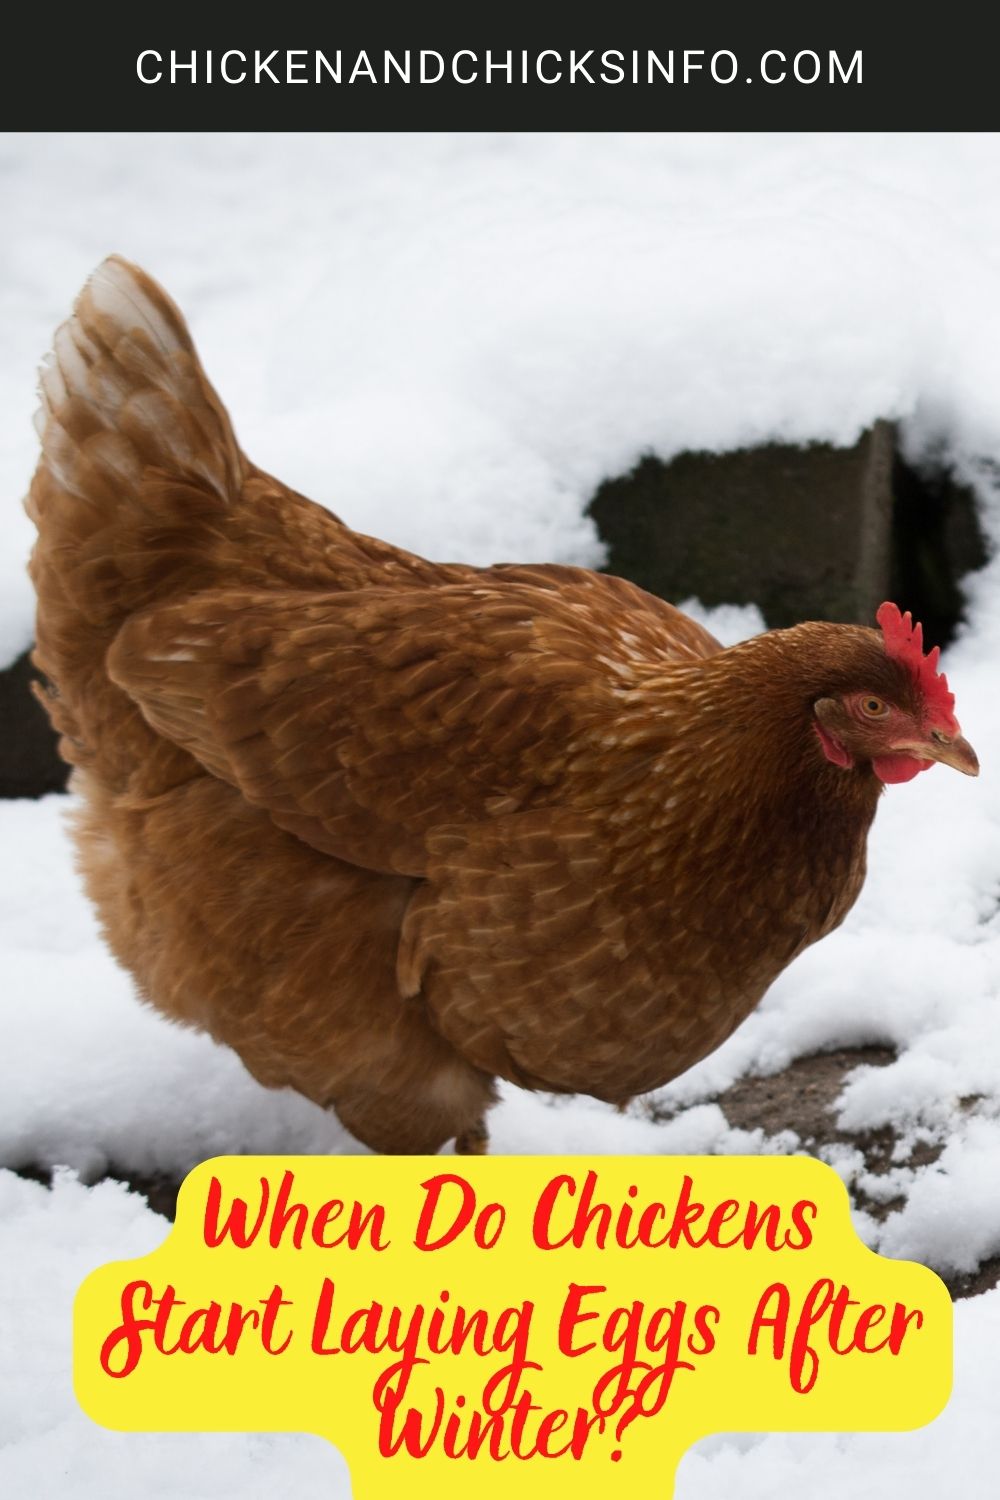 When Do Chickens Start Laying Eggs After Winter? poster.
